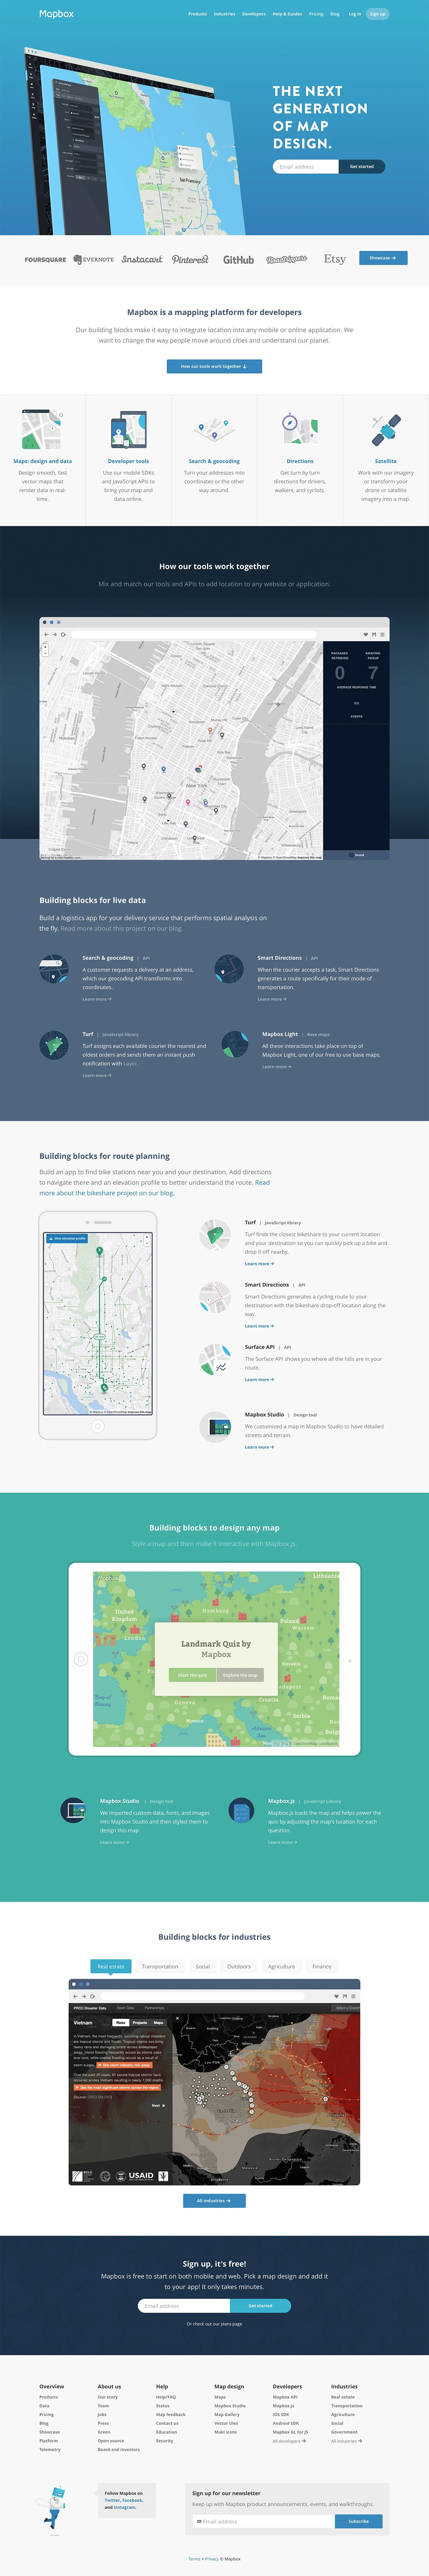 Mapbox Landing Page Example: An open source mapping platform for custom designed maps. Our APIs and SDKs are the building blocks to integrate location into any mobile or web app.